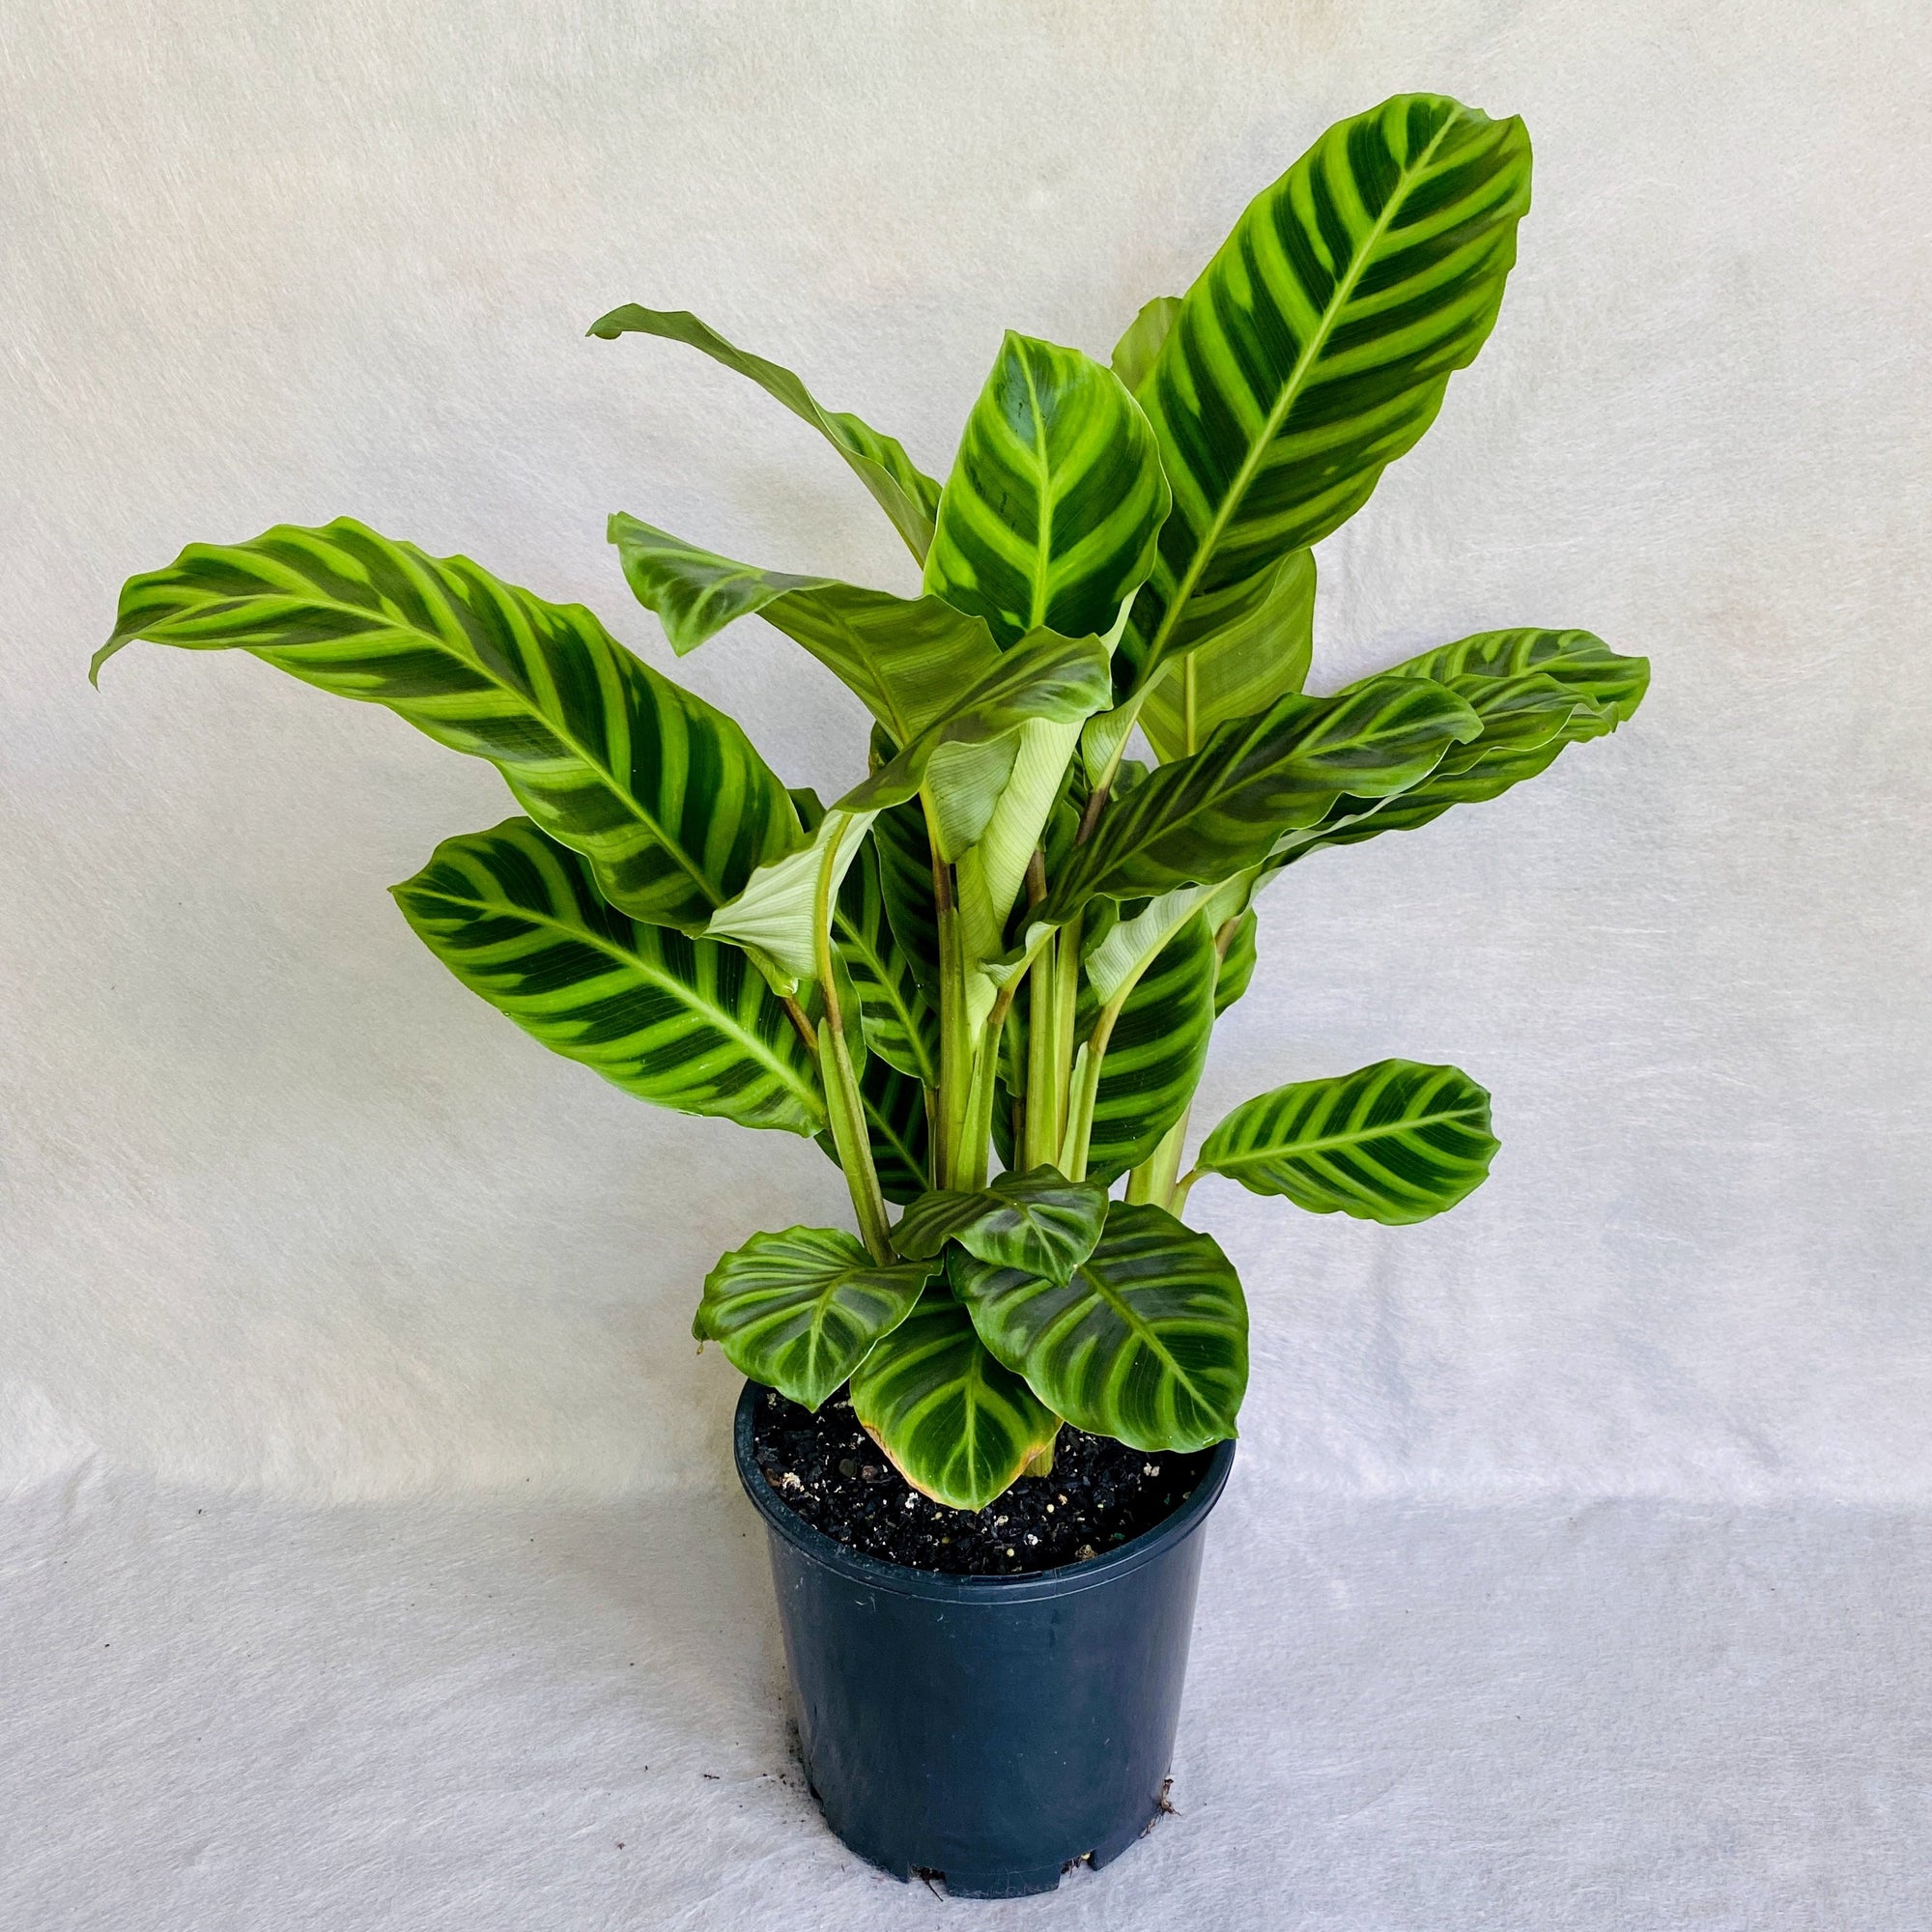 Calathea zebrina has striped velvety leaves, which are light green in color with darker green stripes, like Zebra stripes.